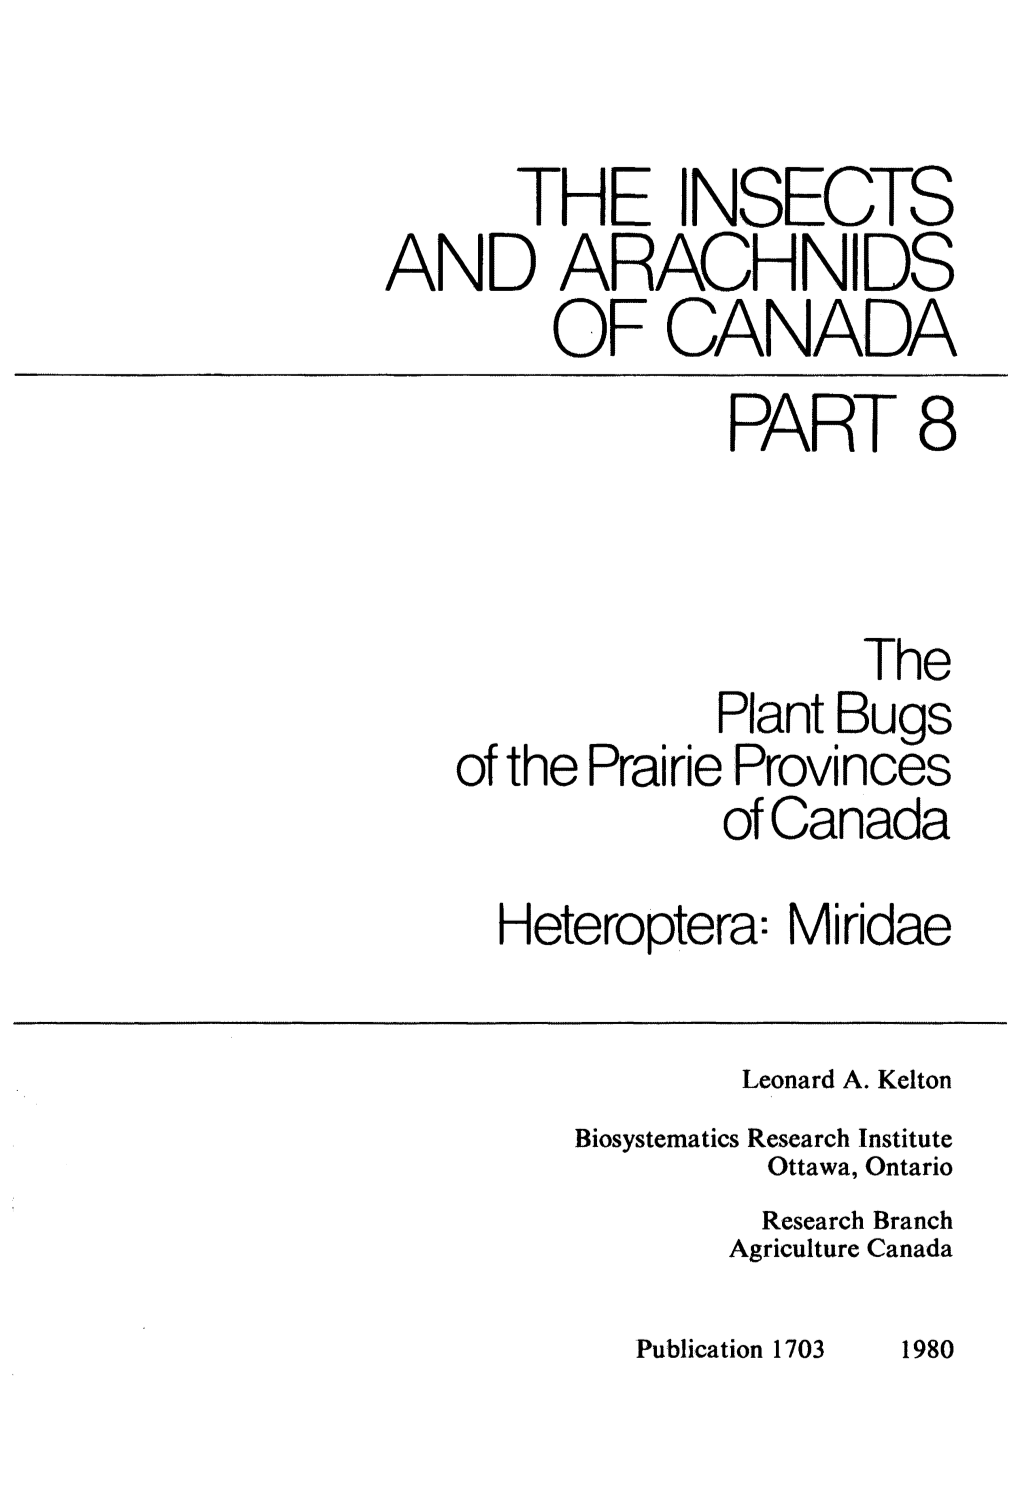 The Insects and Arachnids of Canada Part 8